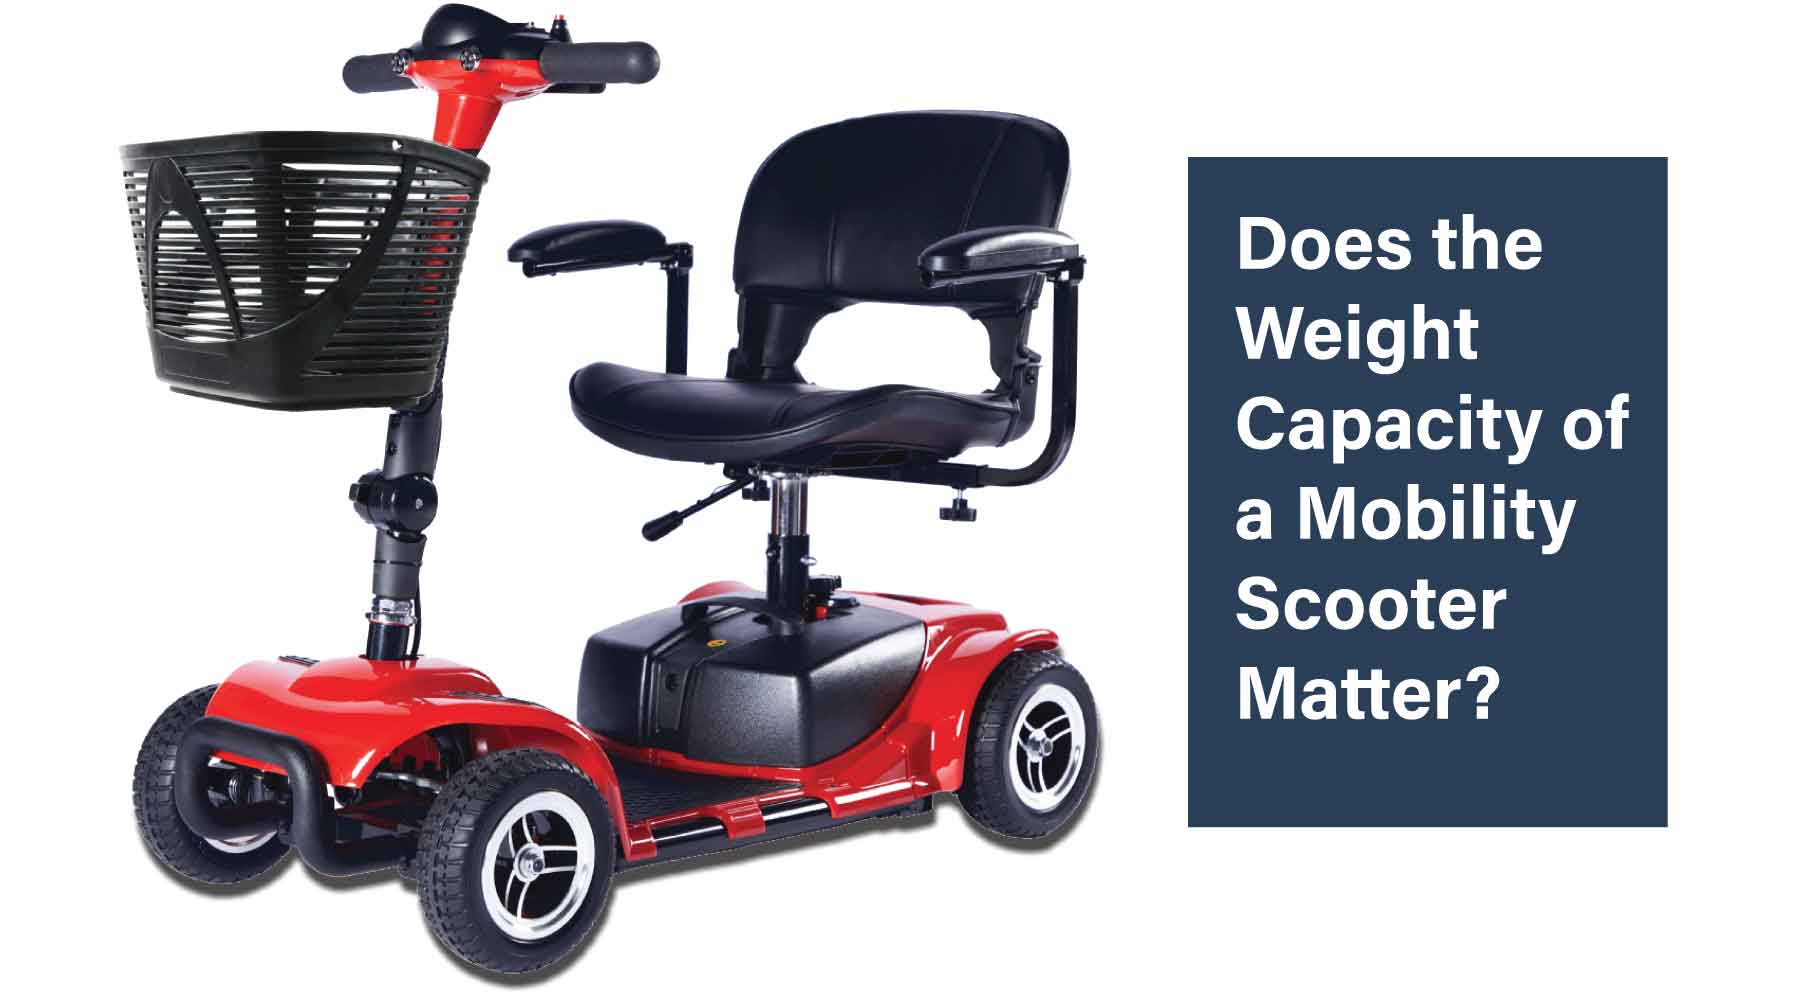 Does the Weight Capacity of a Mobility Scooter Matter?